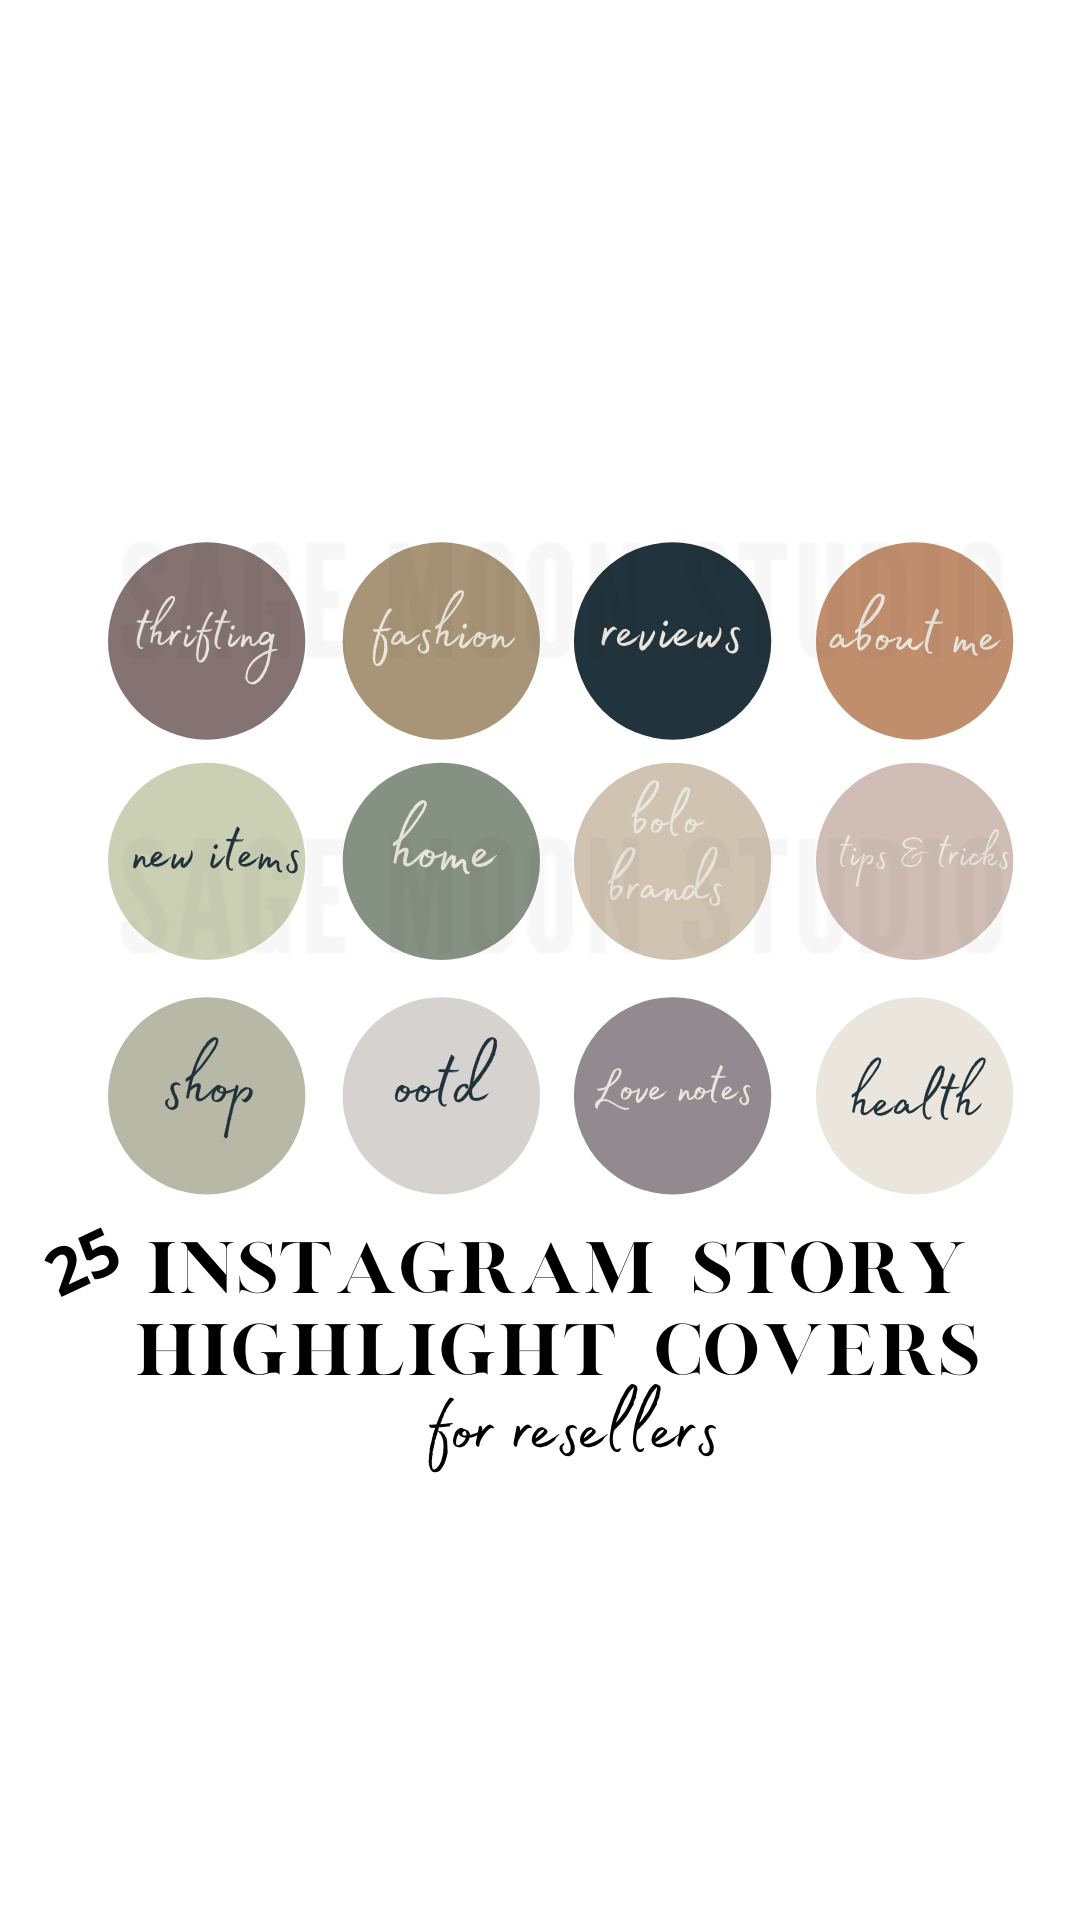 Instagram Story Highlight Covers For Resellers